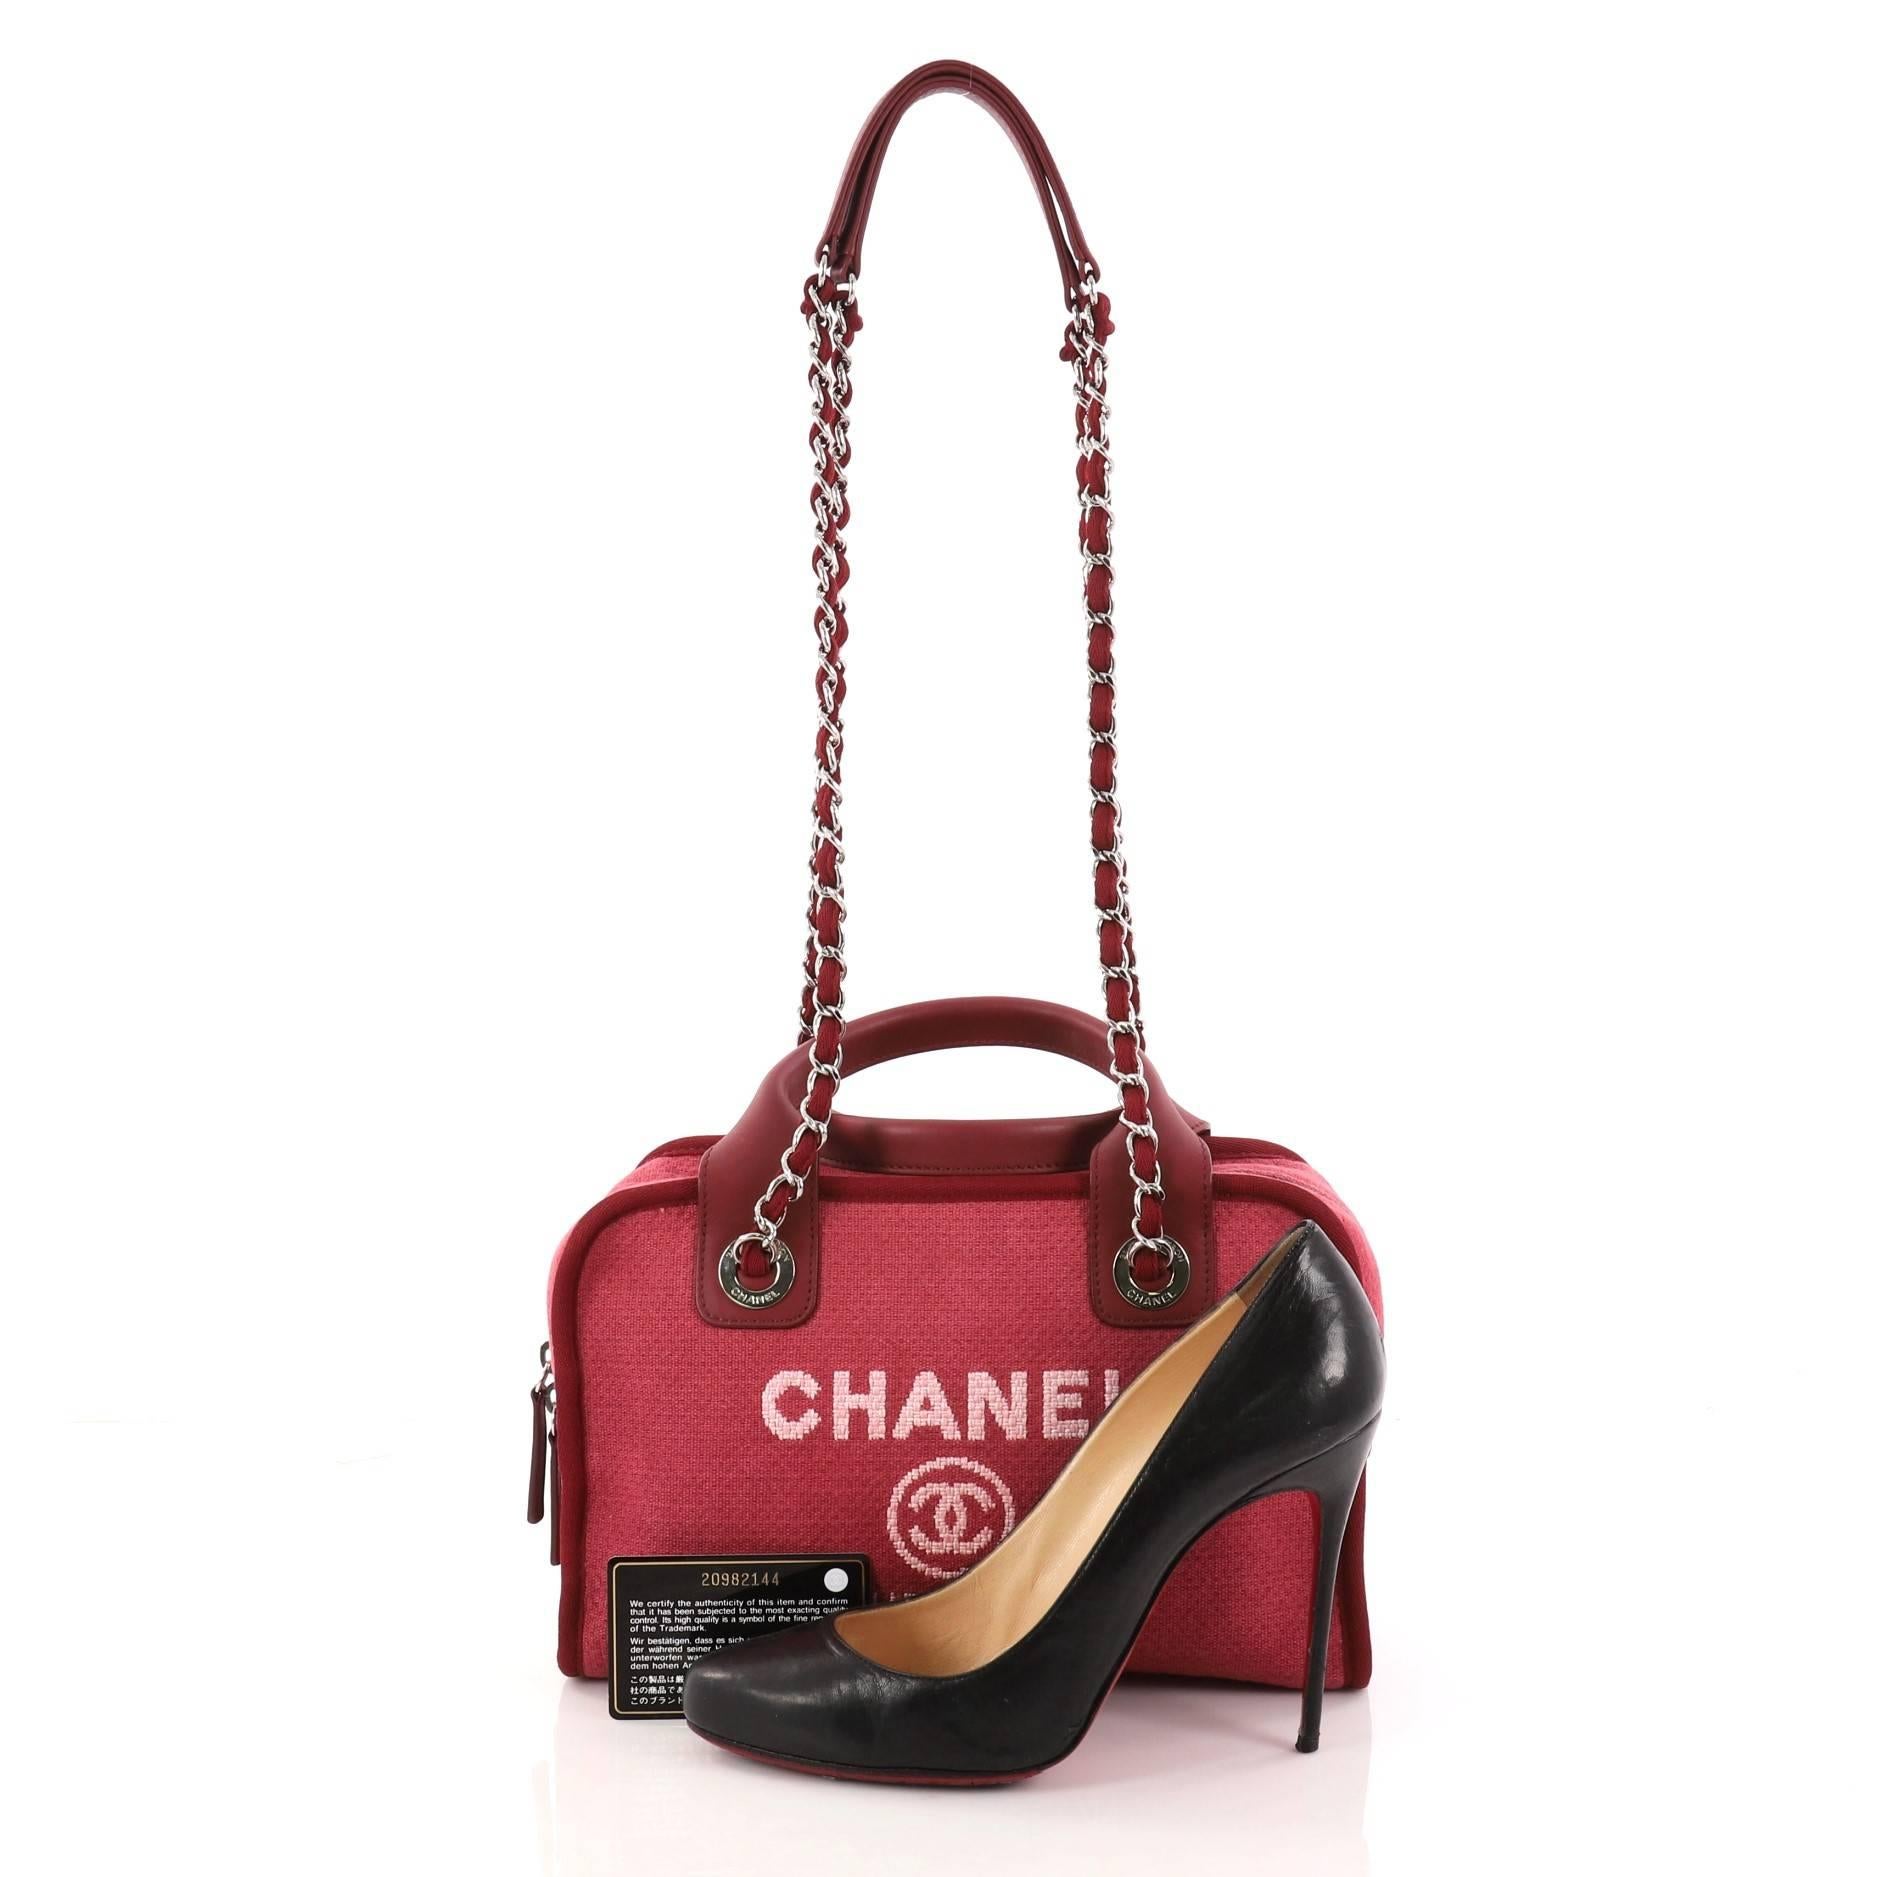 This authentic Chanel Deauville Bowling Bag Canvas Small embodies a casual chic style made for any fashionista. Crafted in lightweight red canvas, this chic satchel features dual-rolled top leather handles, dual woven-in chain straps with leather